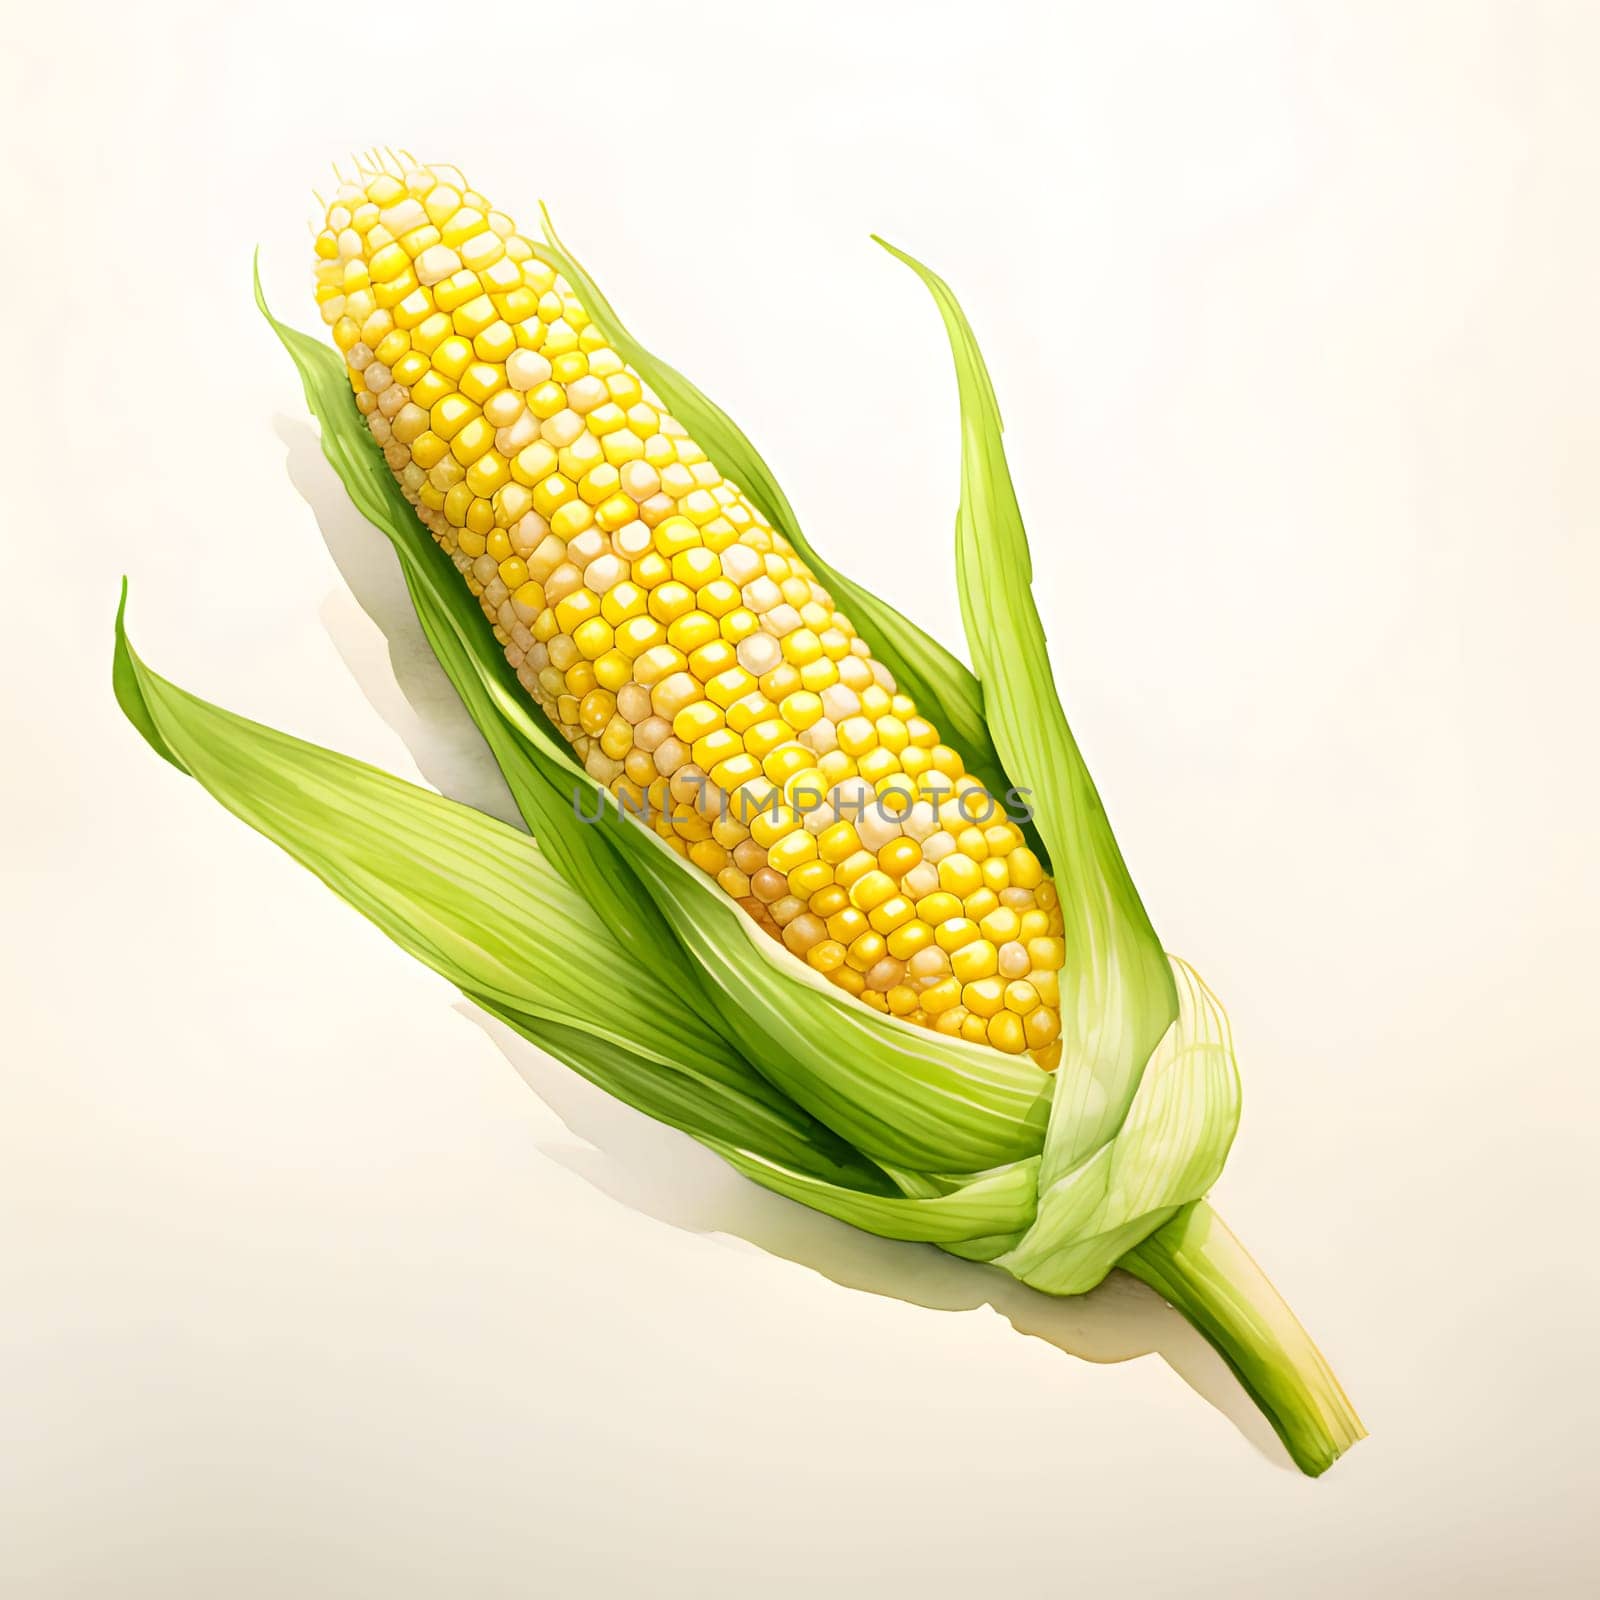 Yellow corn cob in green leaf illustration on light isolated background. Corn as a dish of thanksgiving for the harvest. An atmosphere of joy and celebration.